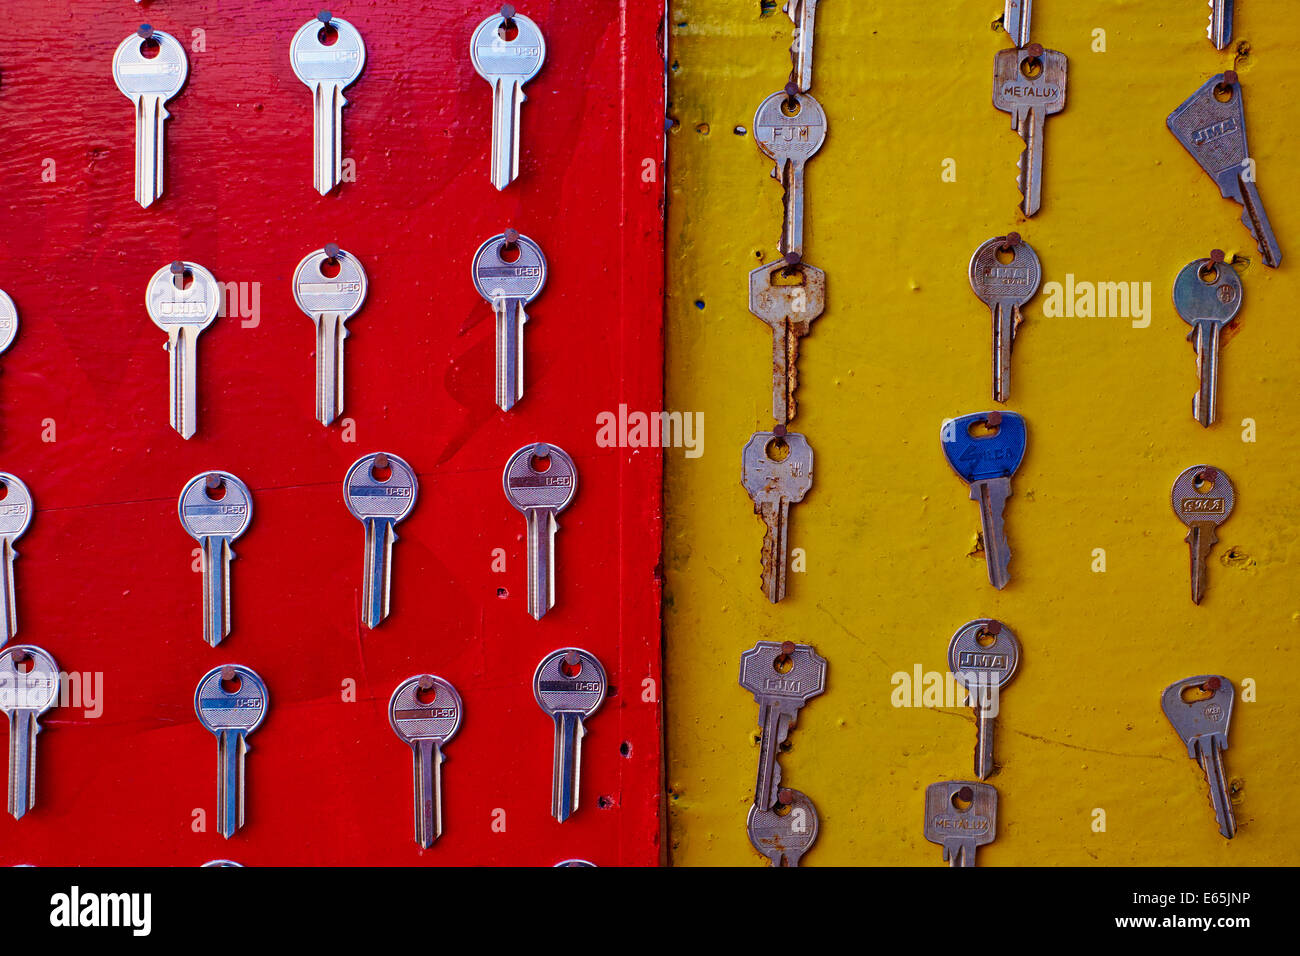 Photos Clef Images Clef Page 2 Alamy